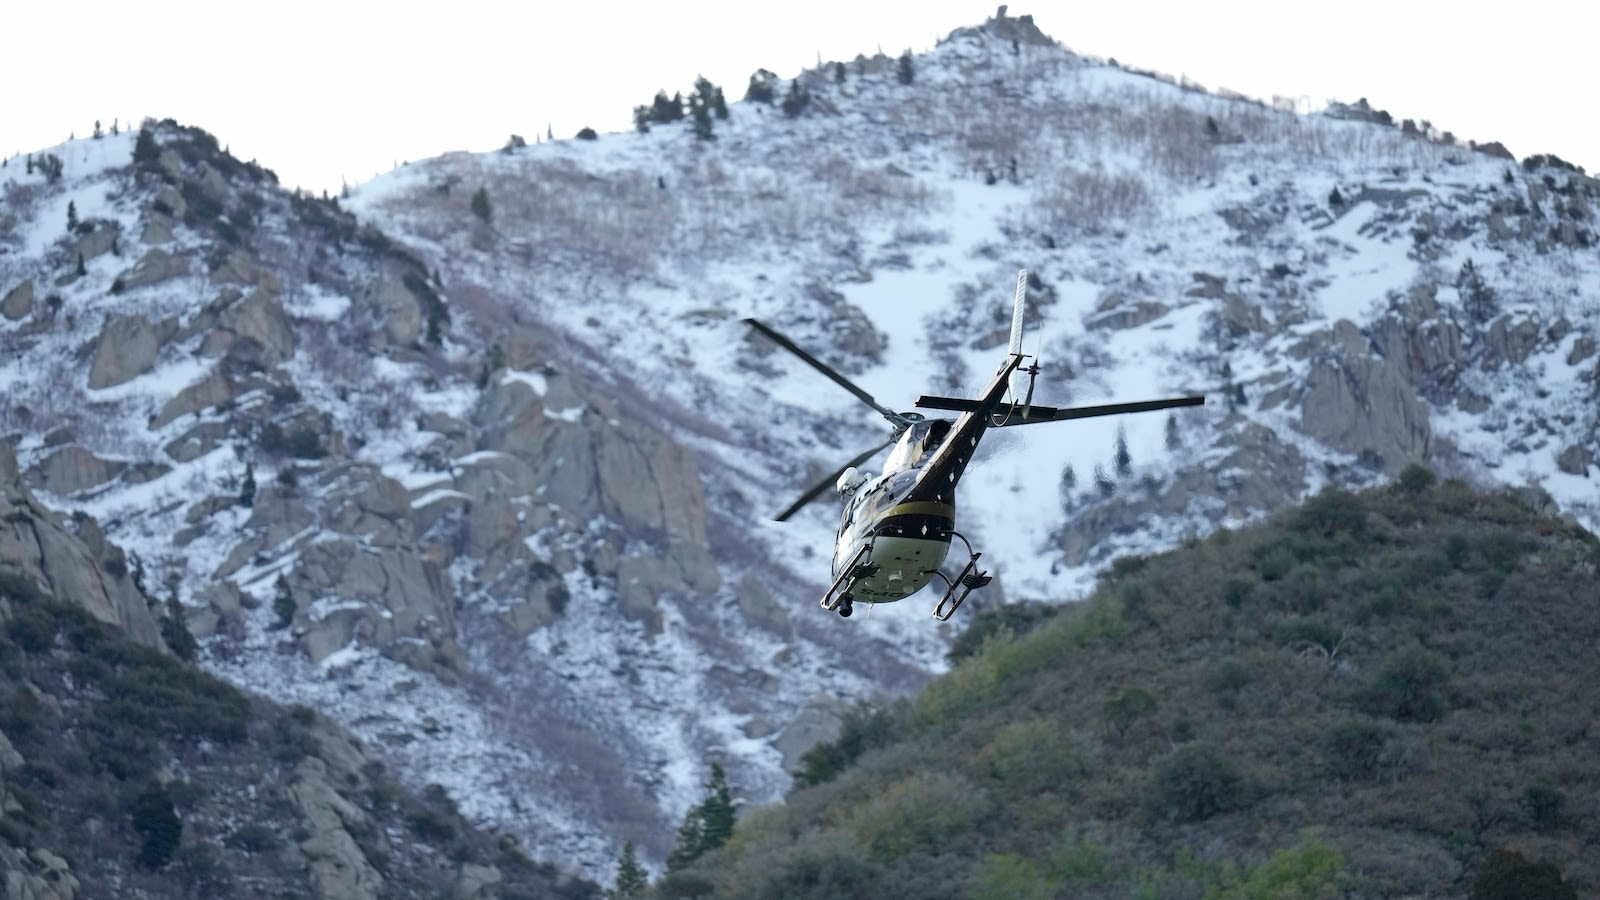 Search crews uncover bodies of 2 skiers buried by Utah avalanche